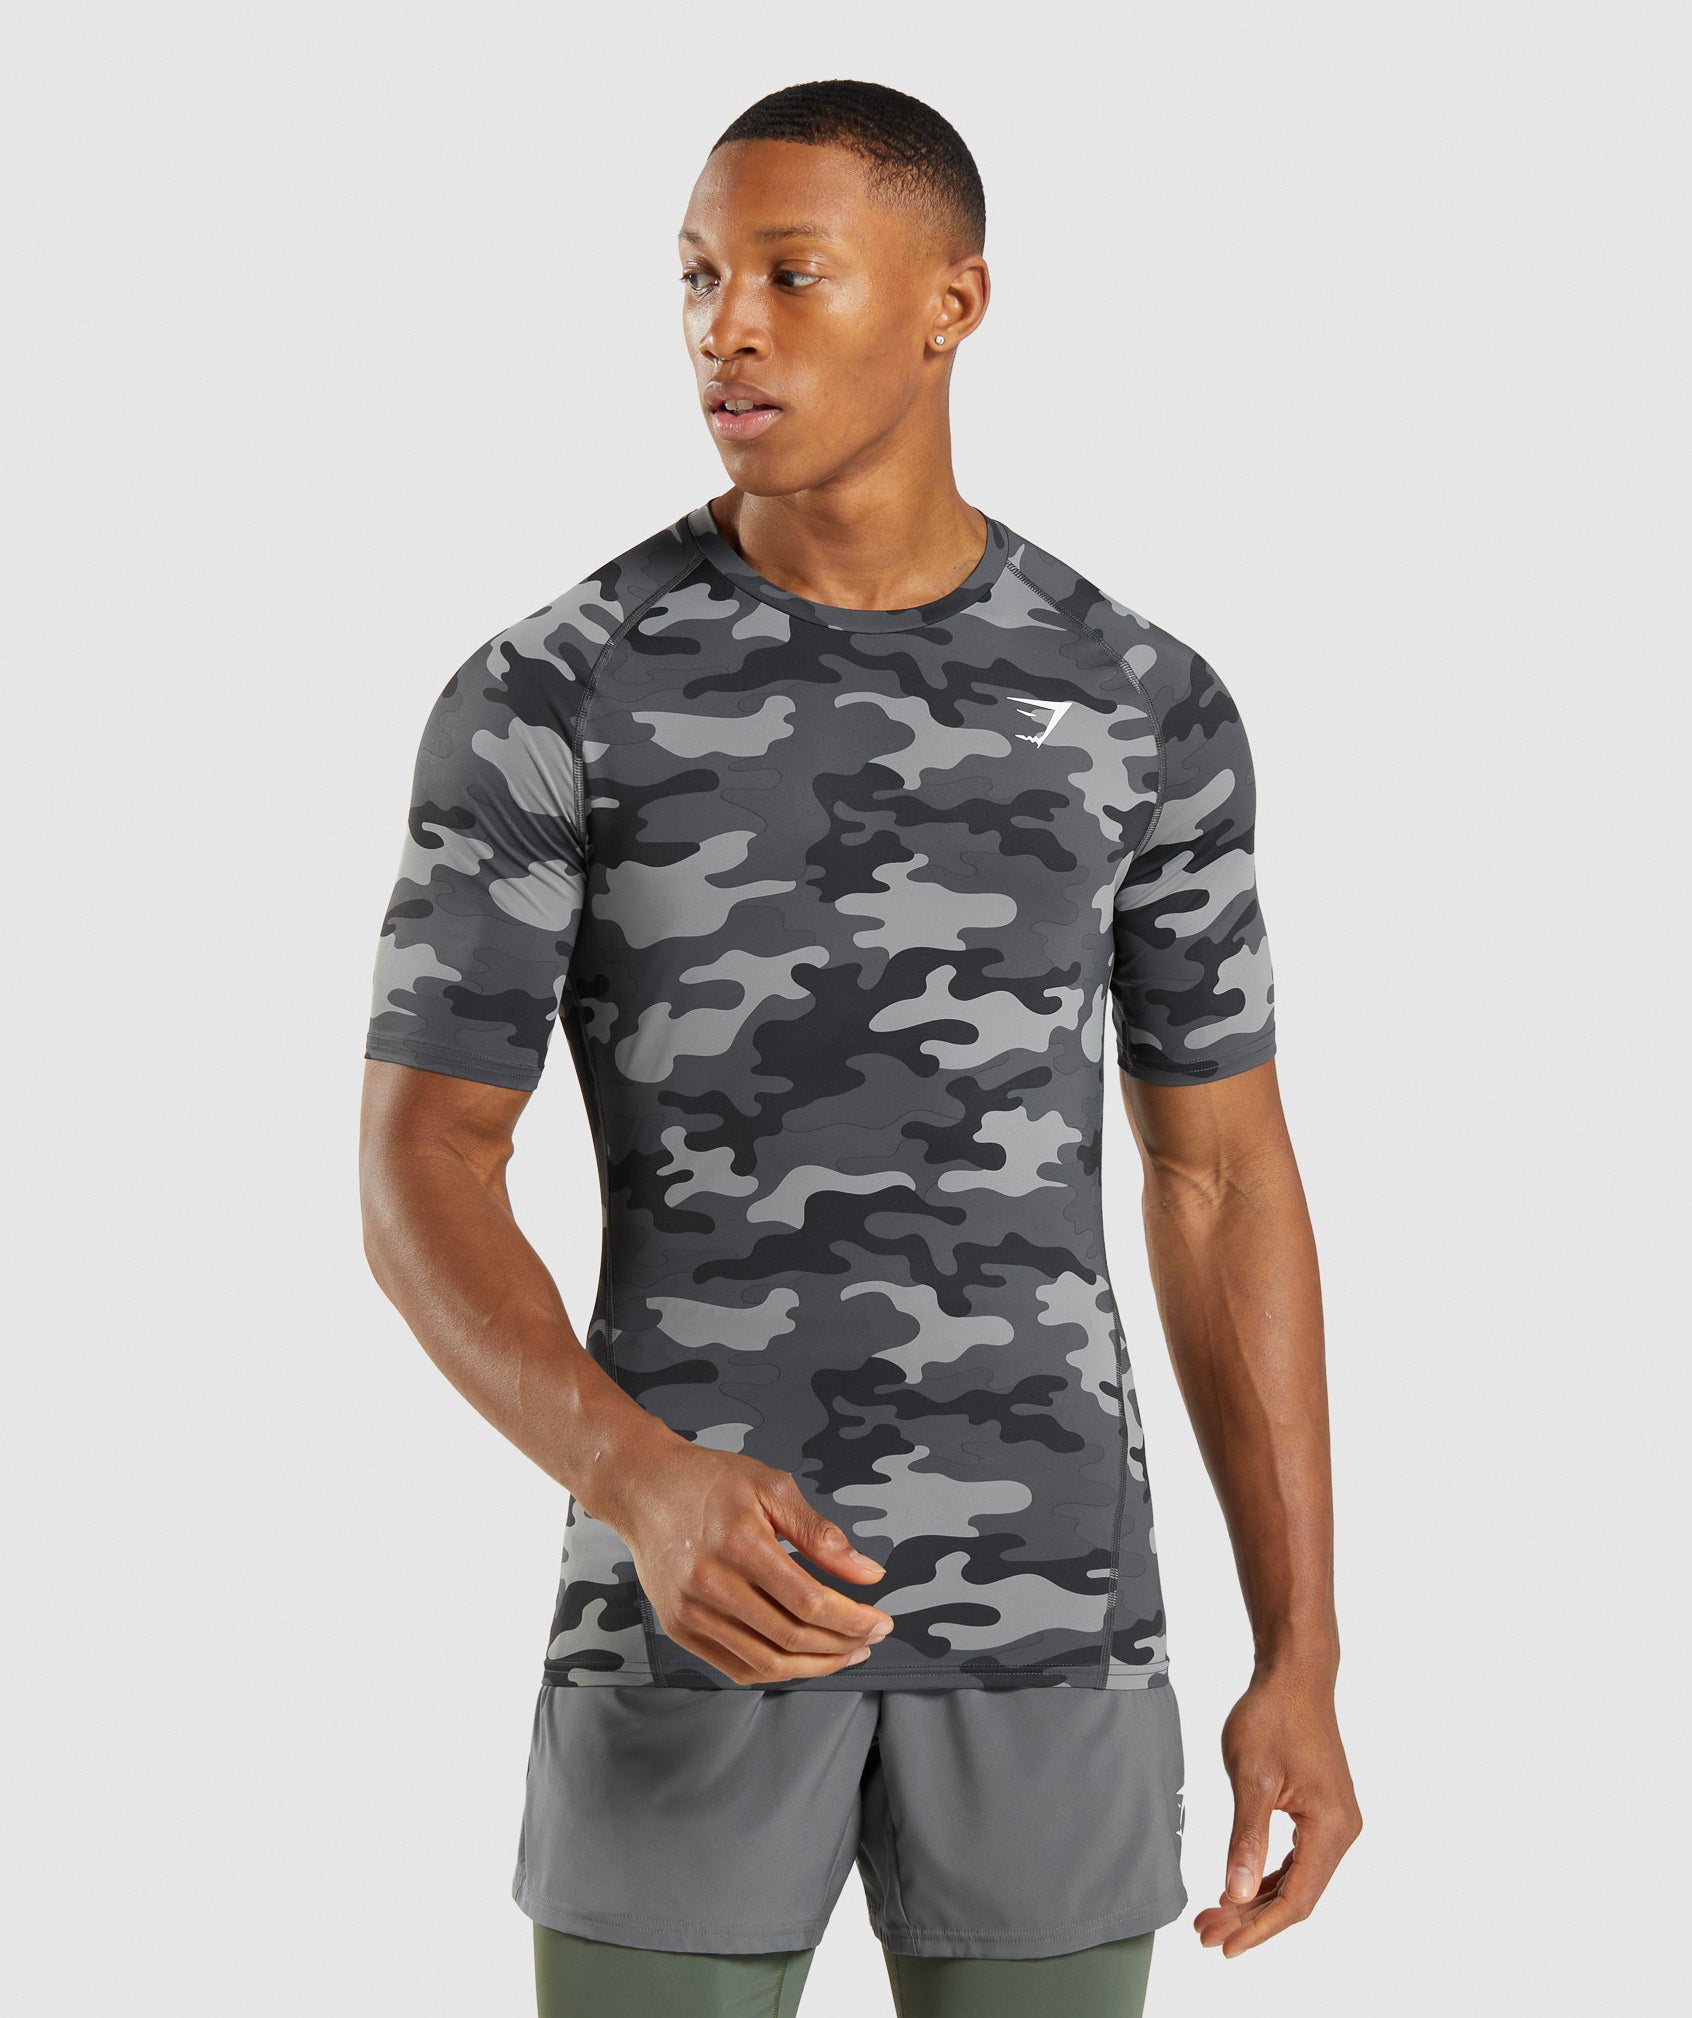 Element Baselayer T-Shirt in Camo Grey Print - view 1